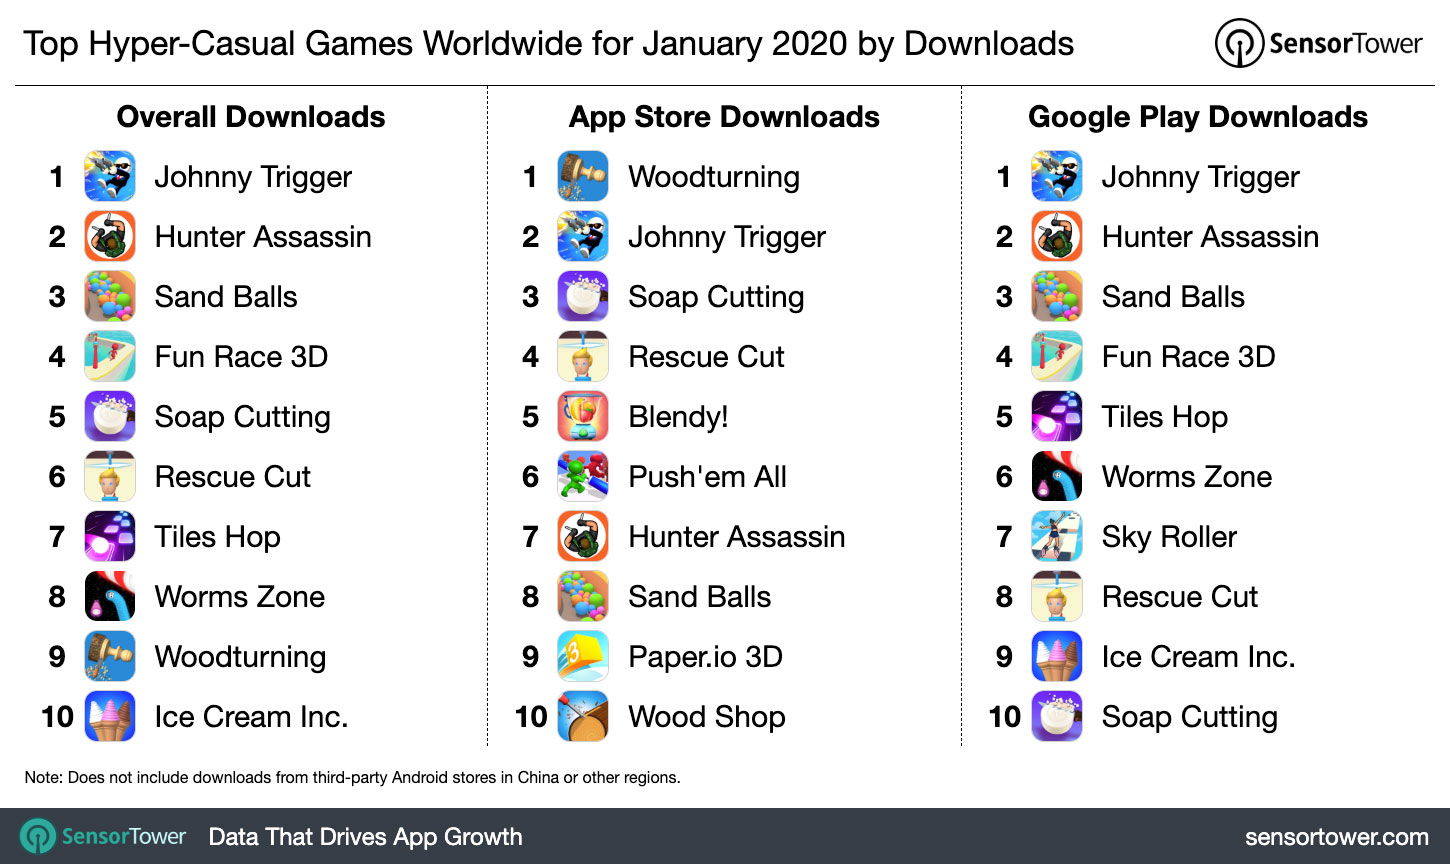 Top Hyper-Casual Games Worldwide January 2020 by Downloads